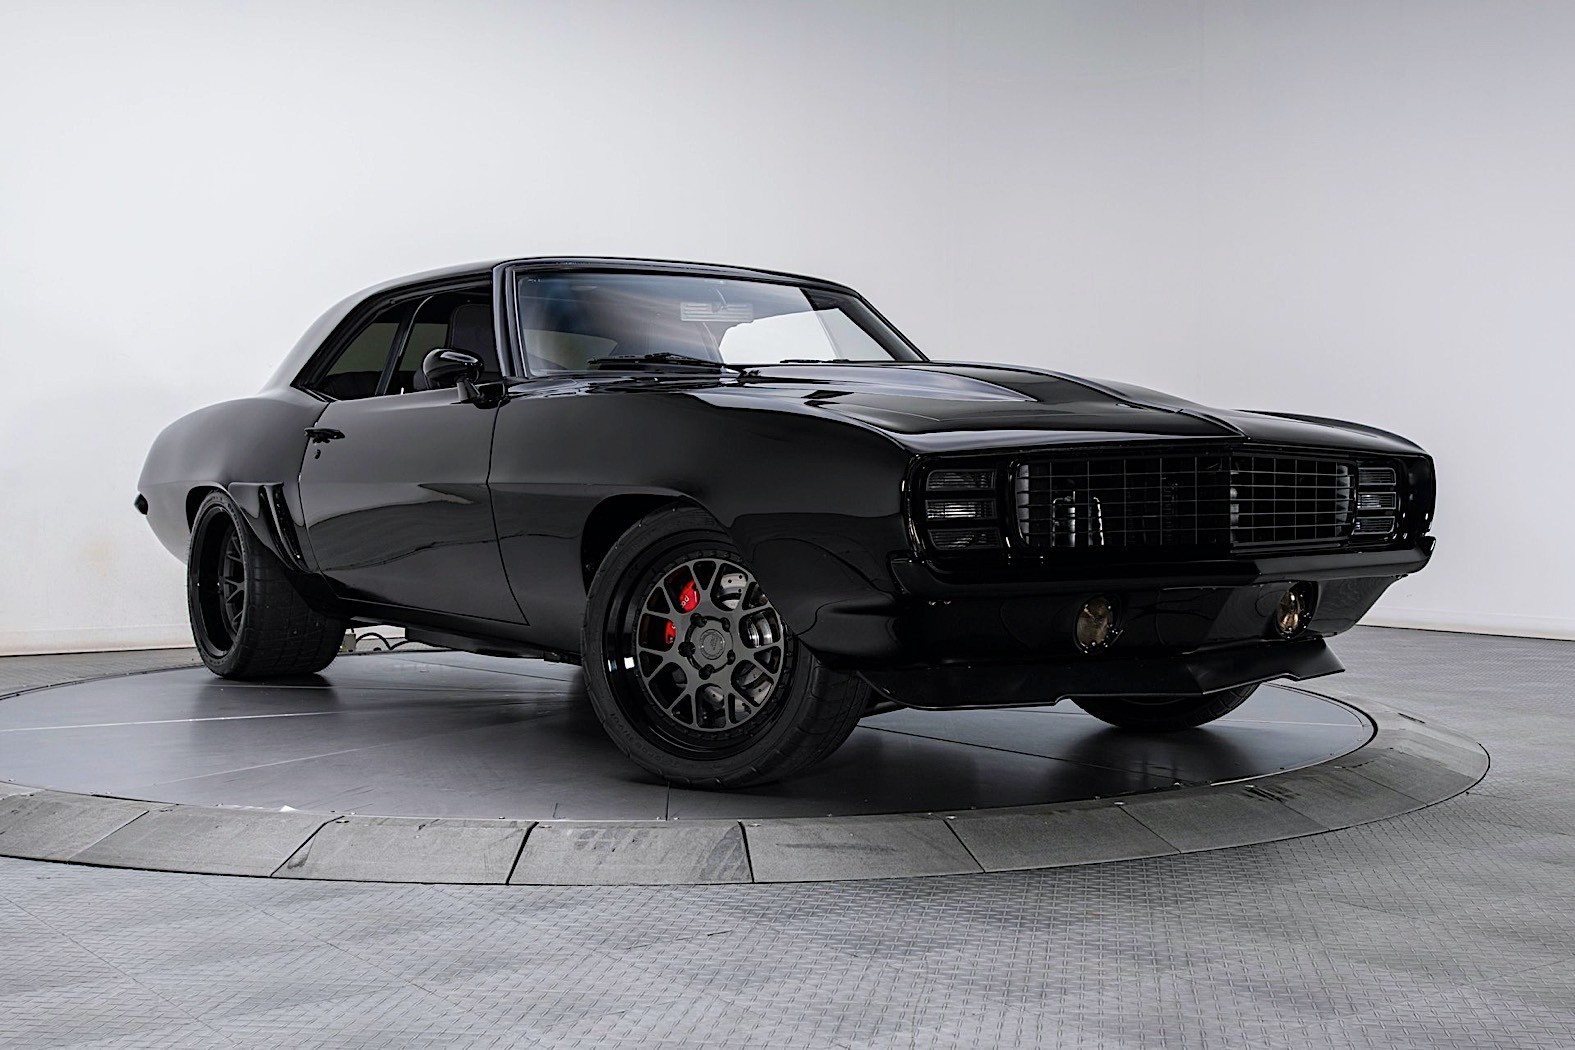 People Still Scared of This Black as Night 1969 Chevrolet Camaro, No Buyer  Yet - autoevolution